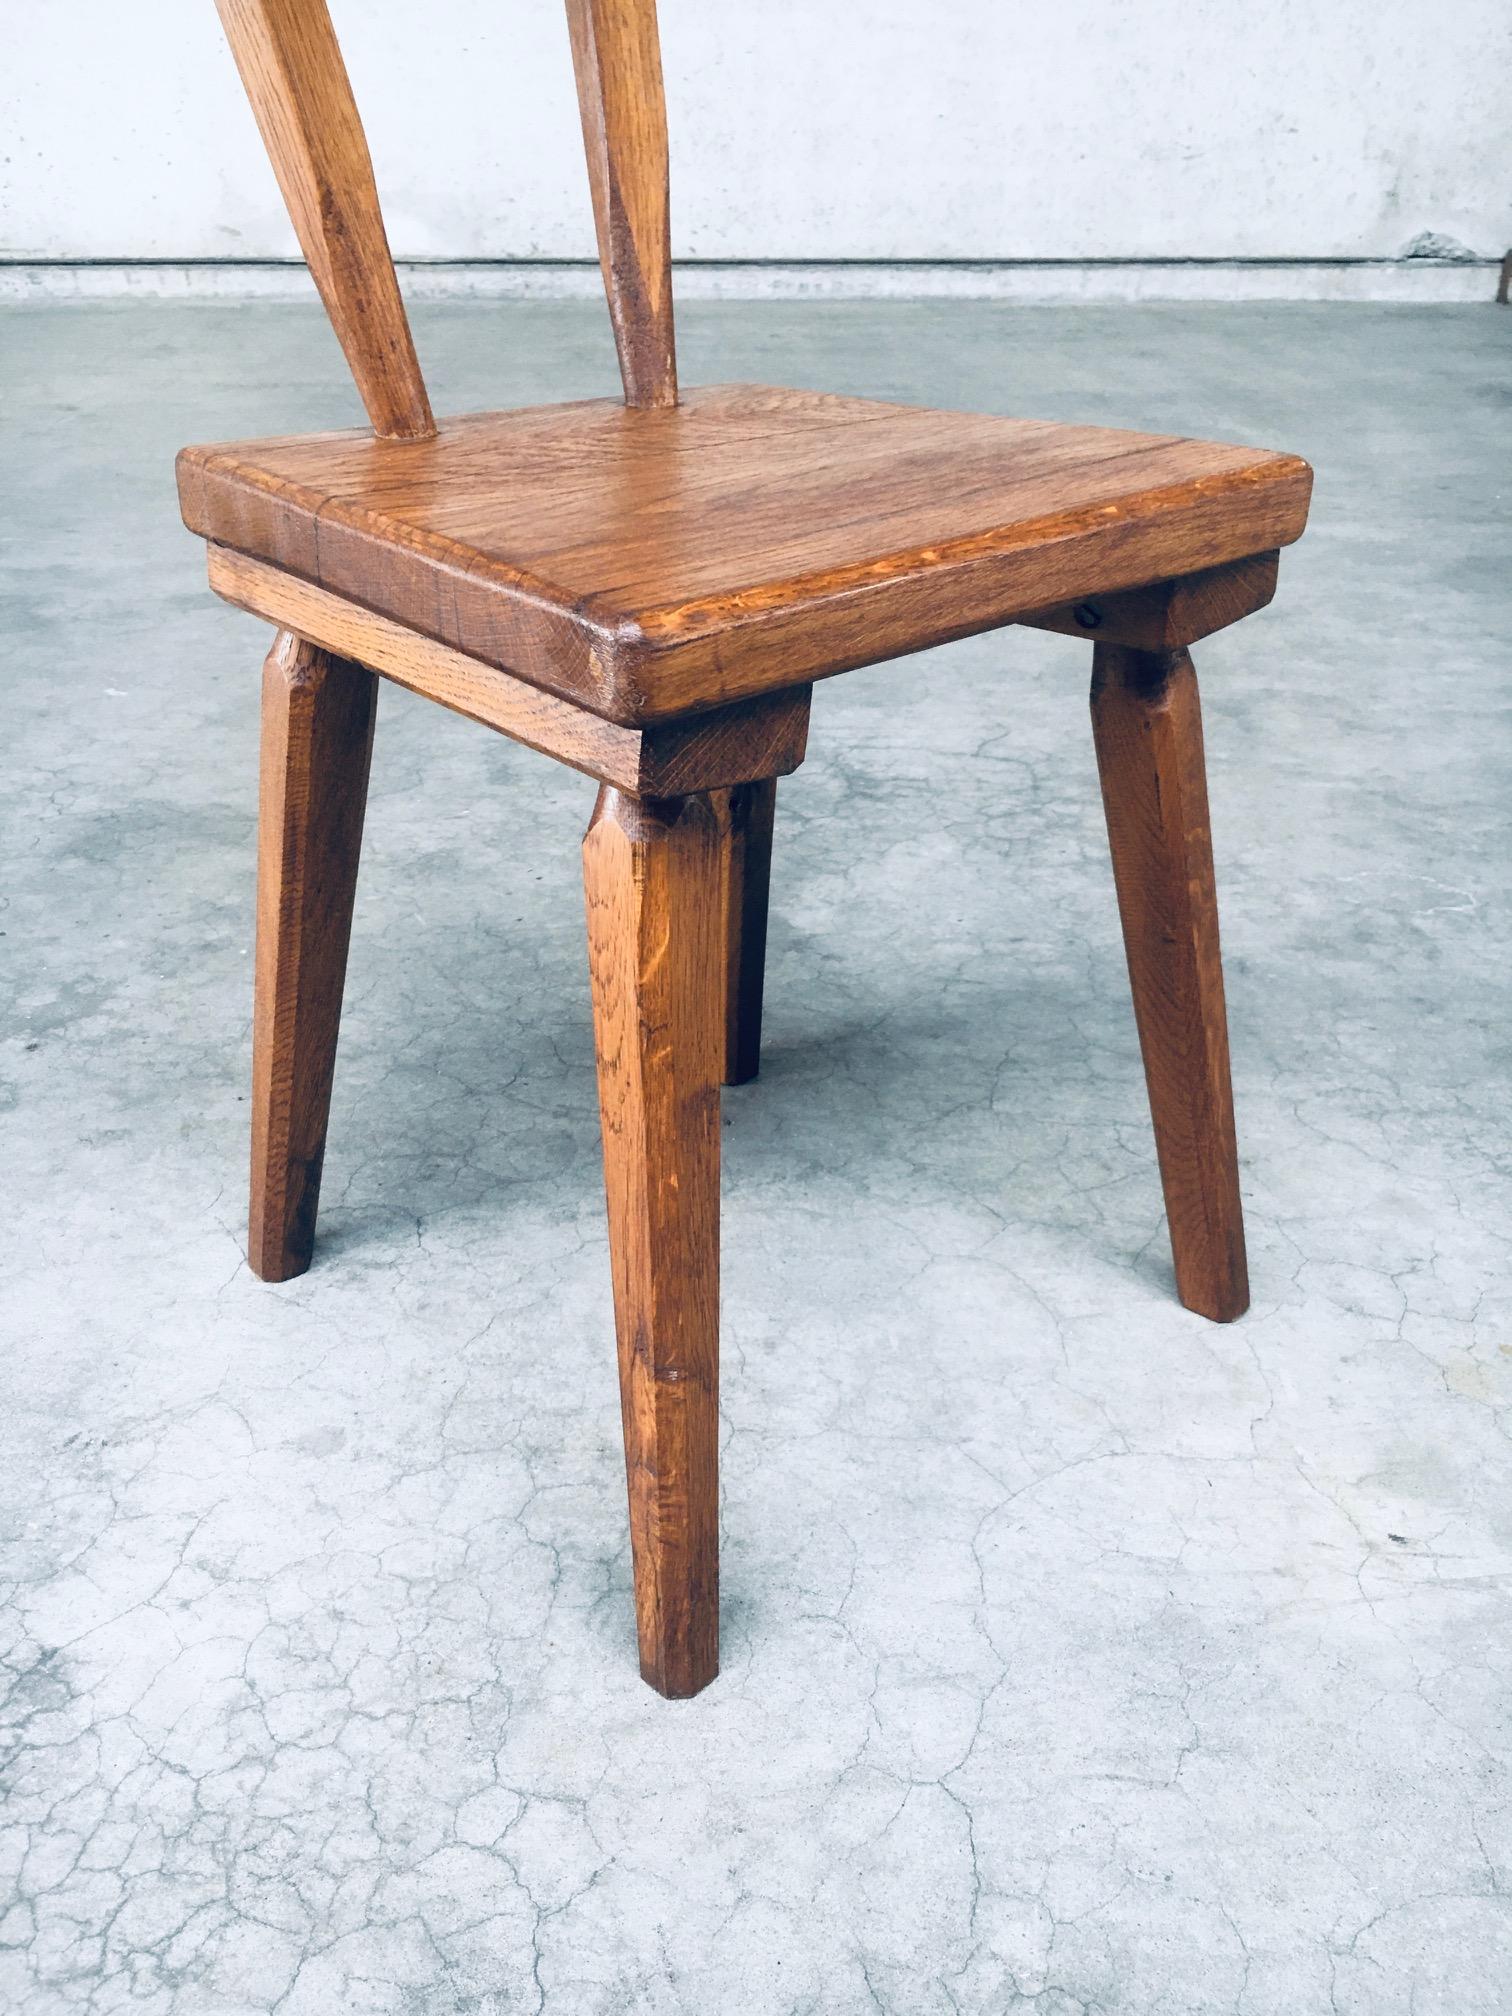 Handcrafted Folk Art Rustic Oak Dining Chair Set, France, 1940s For Sale 11